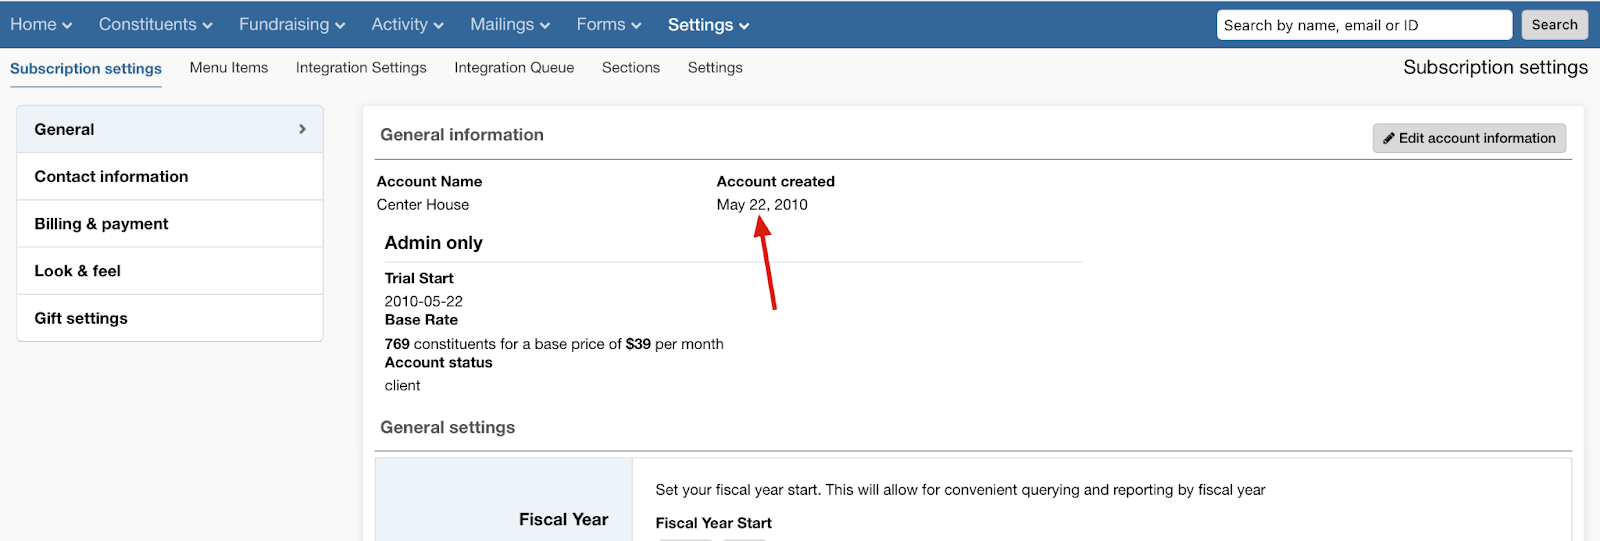 Account created date field added to LGL